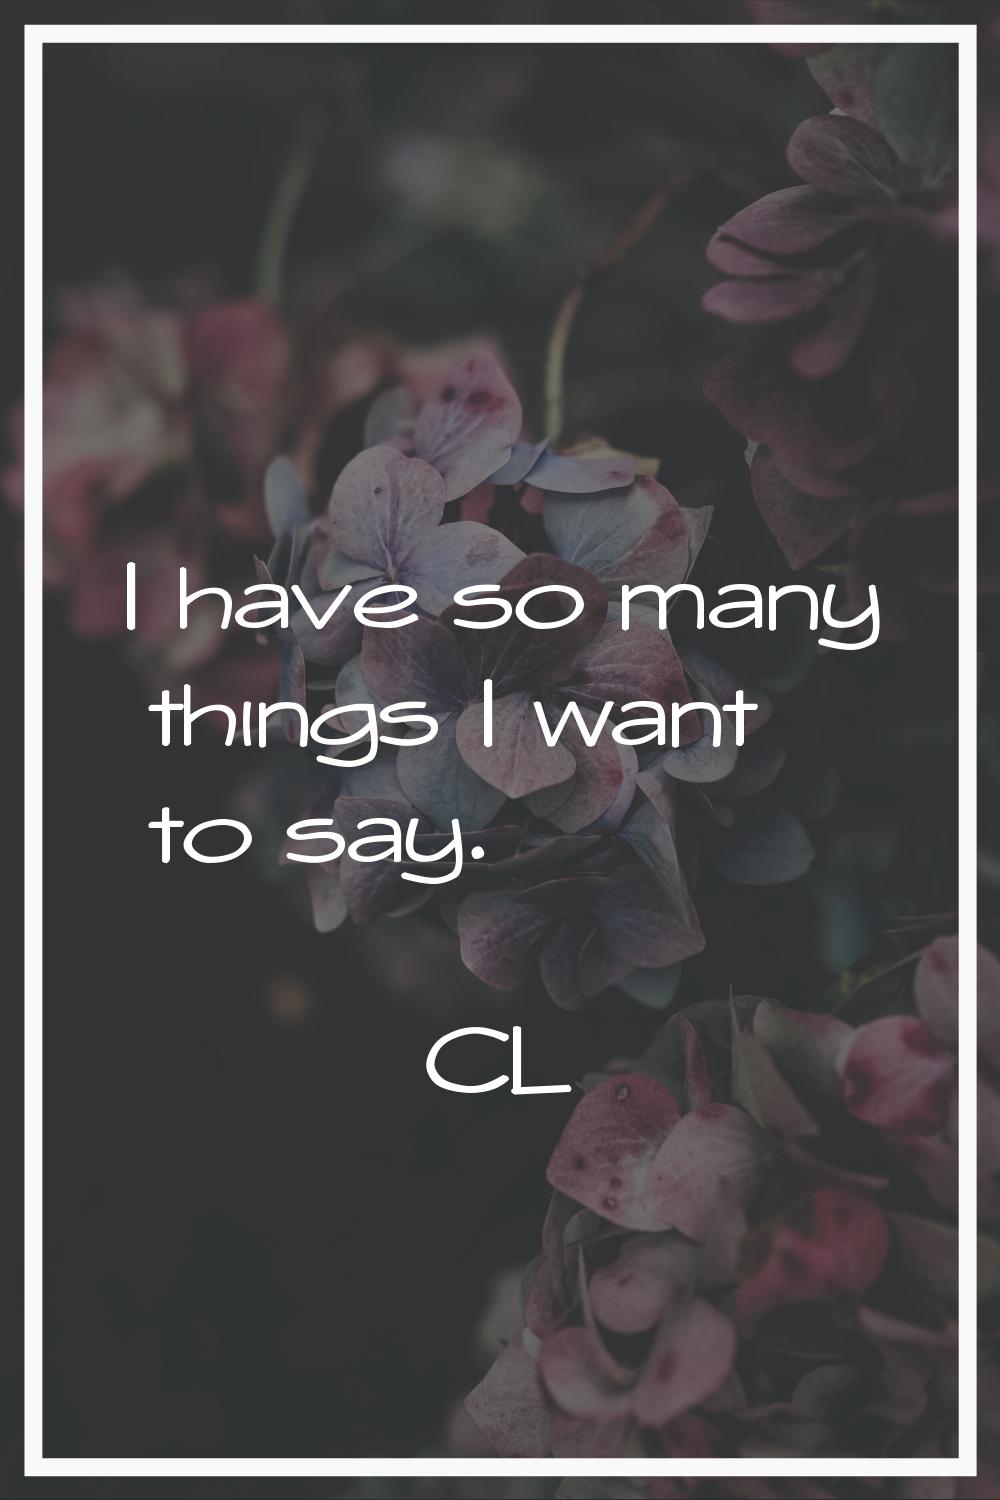 I have so many things I want to say.